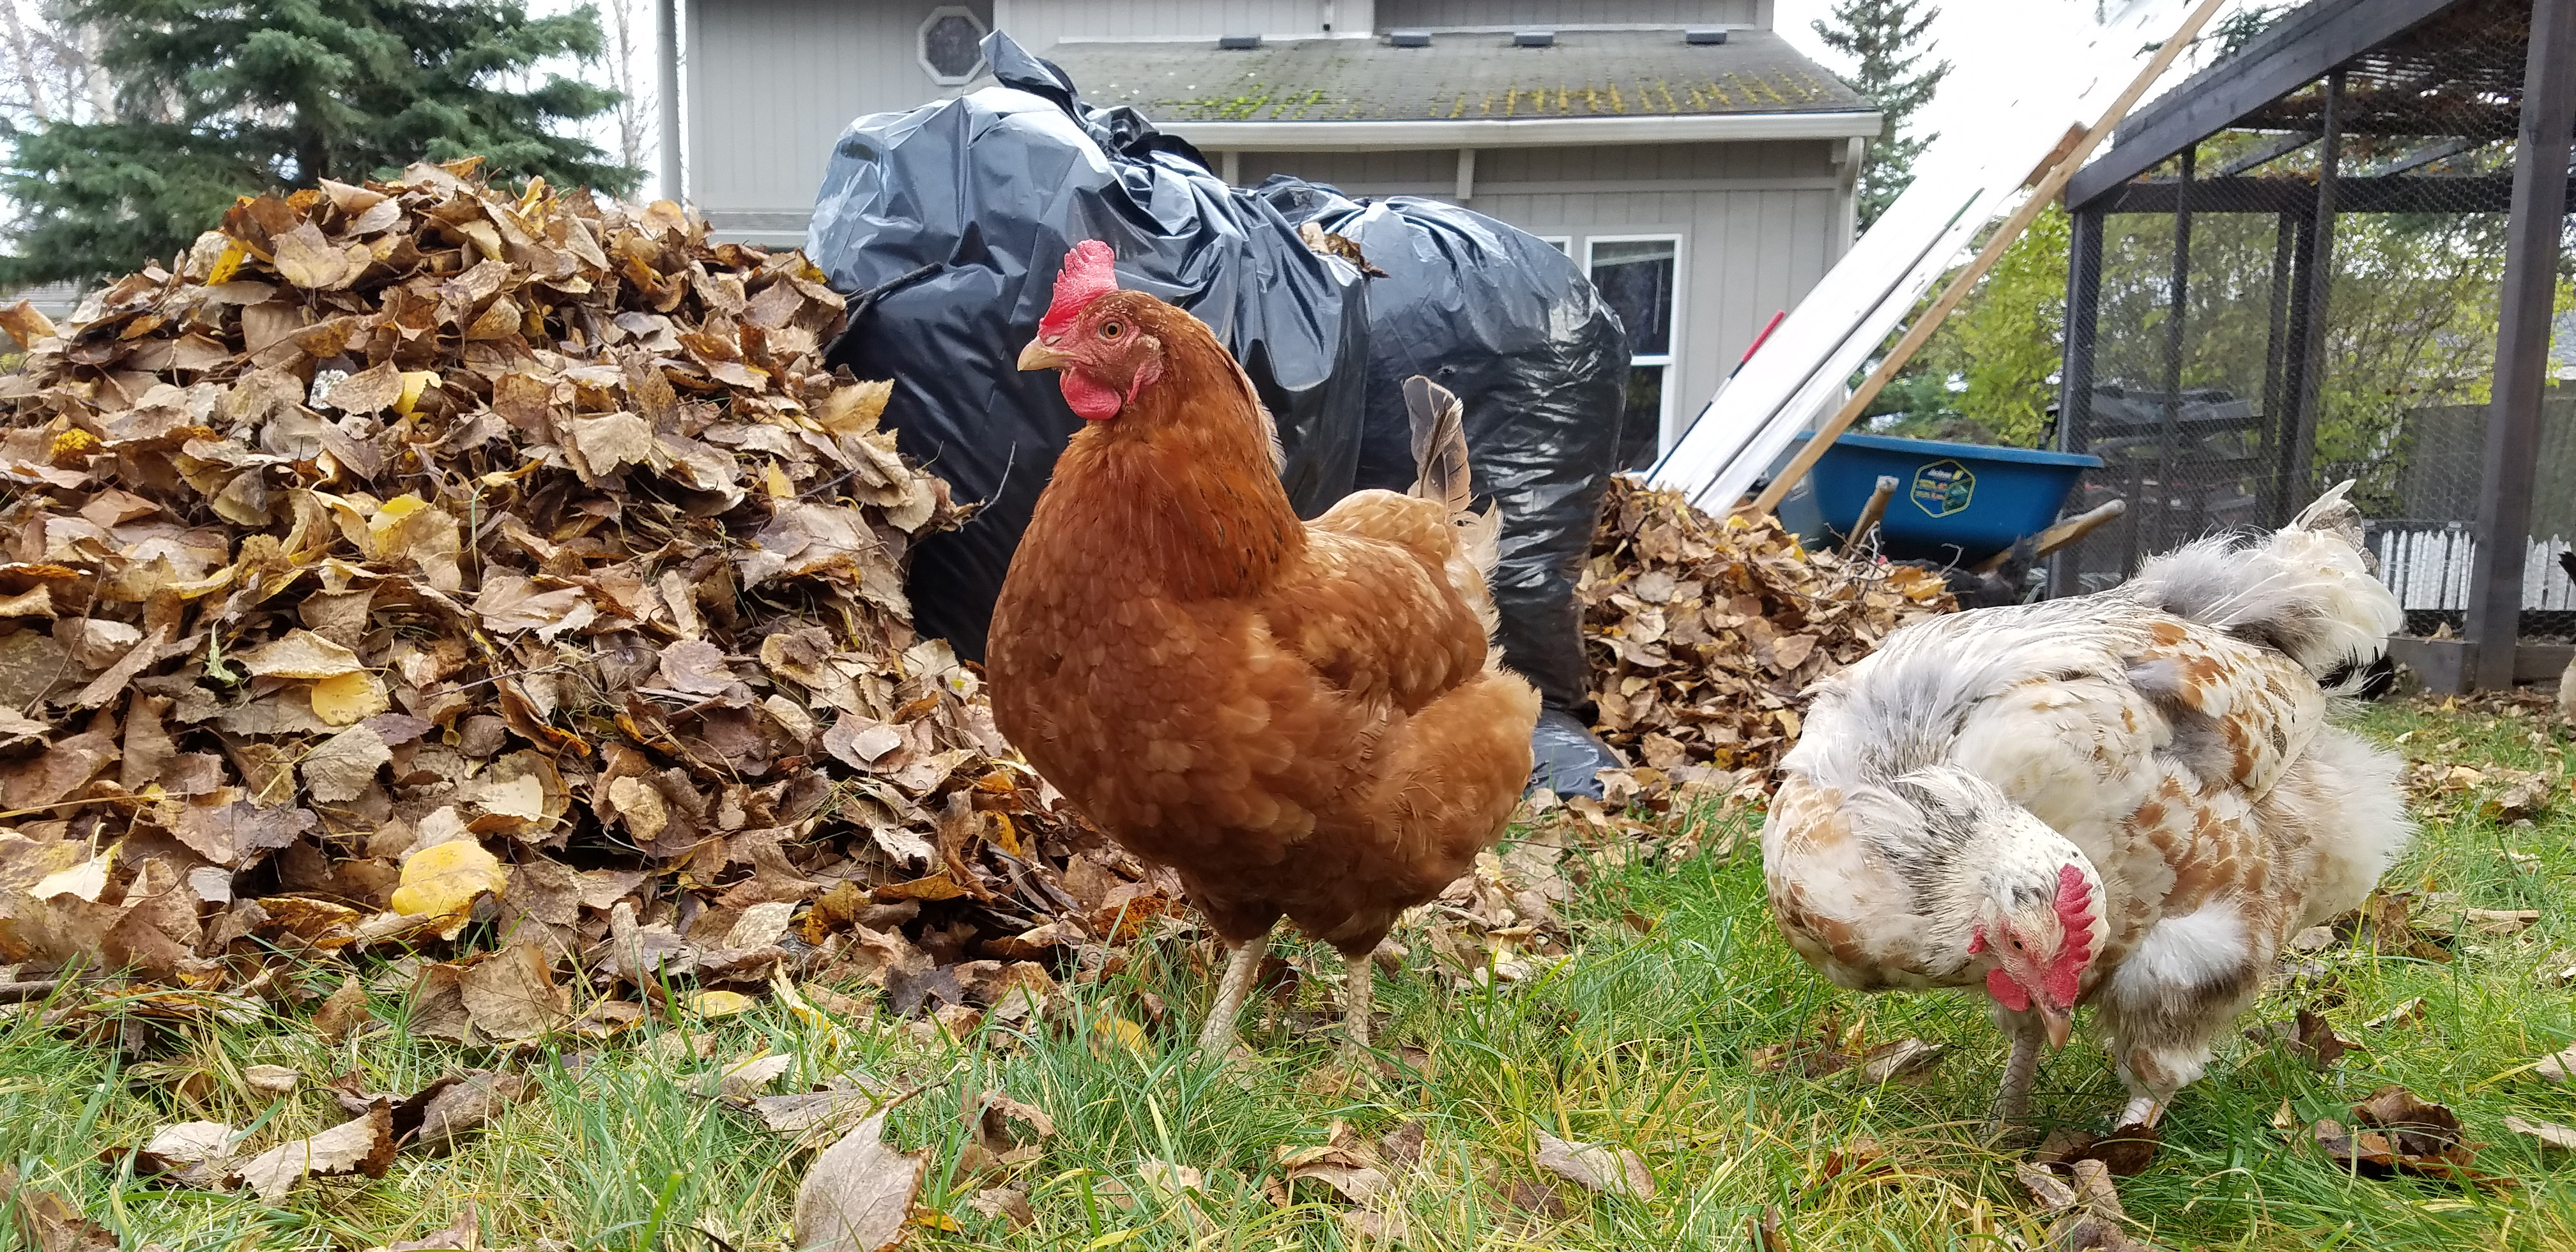 two chickens by leaf pile during fall